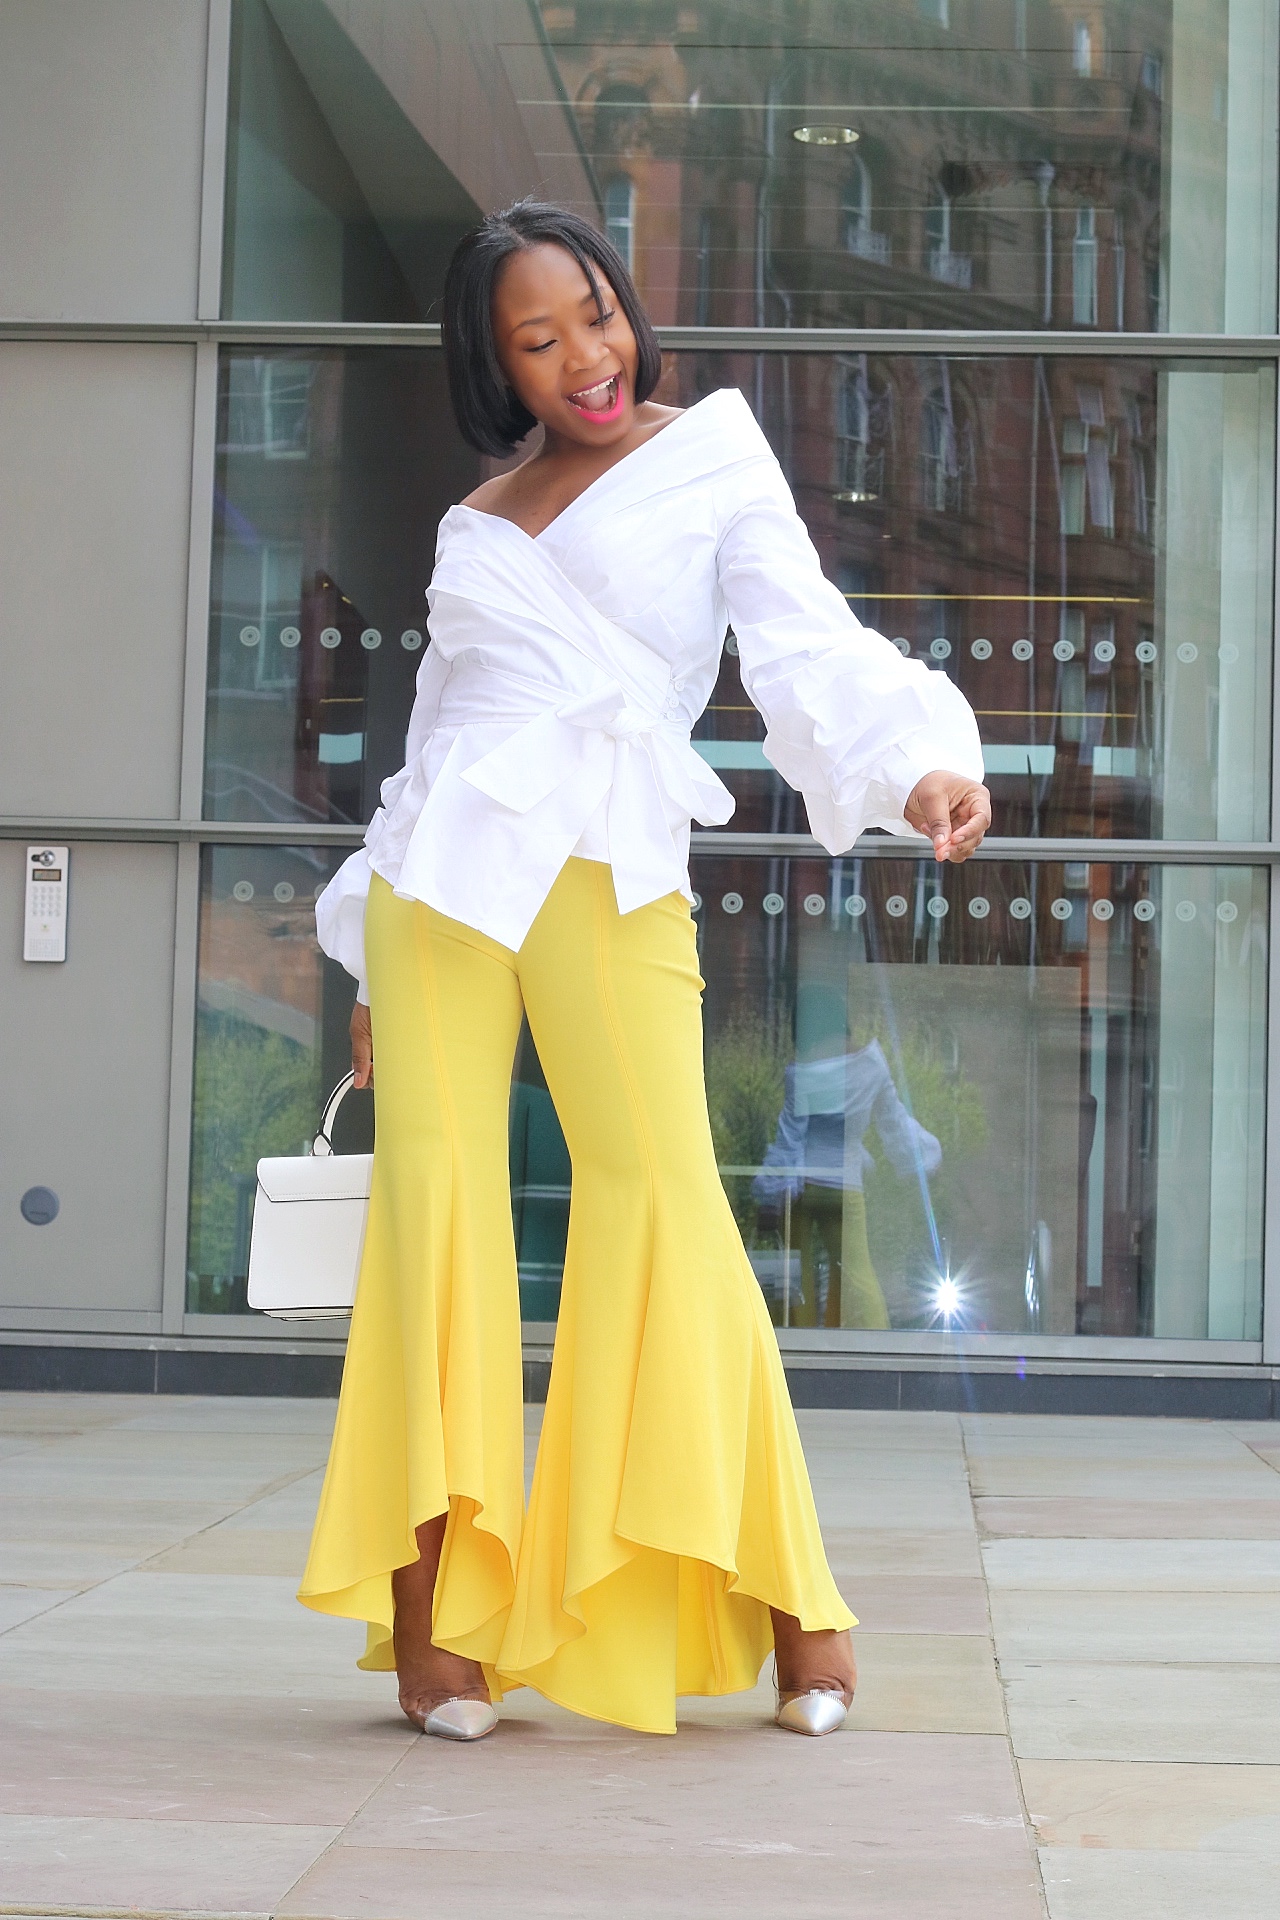 Fashion Bombshell of the Day: Damilola From Manchester